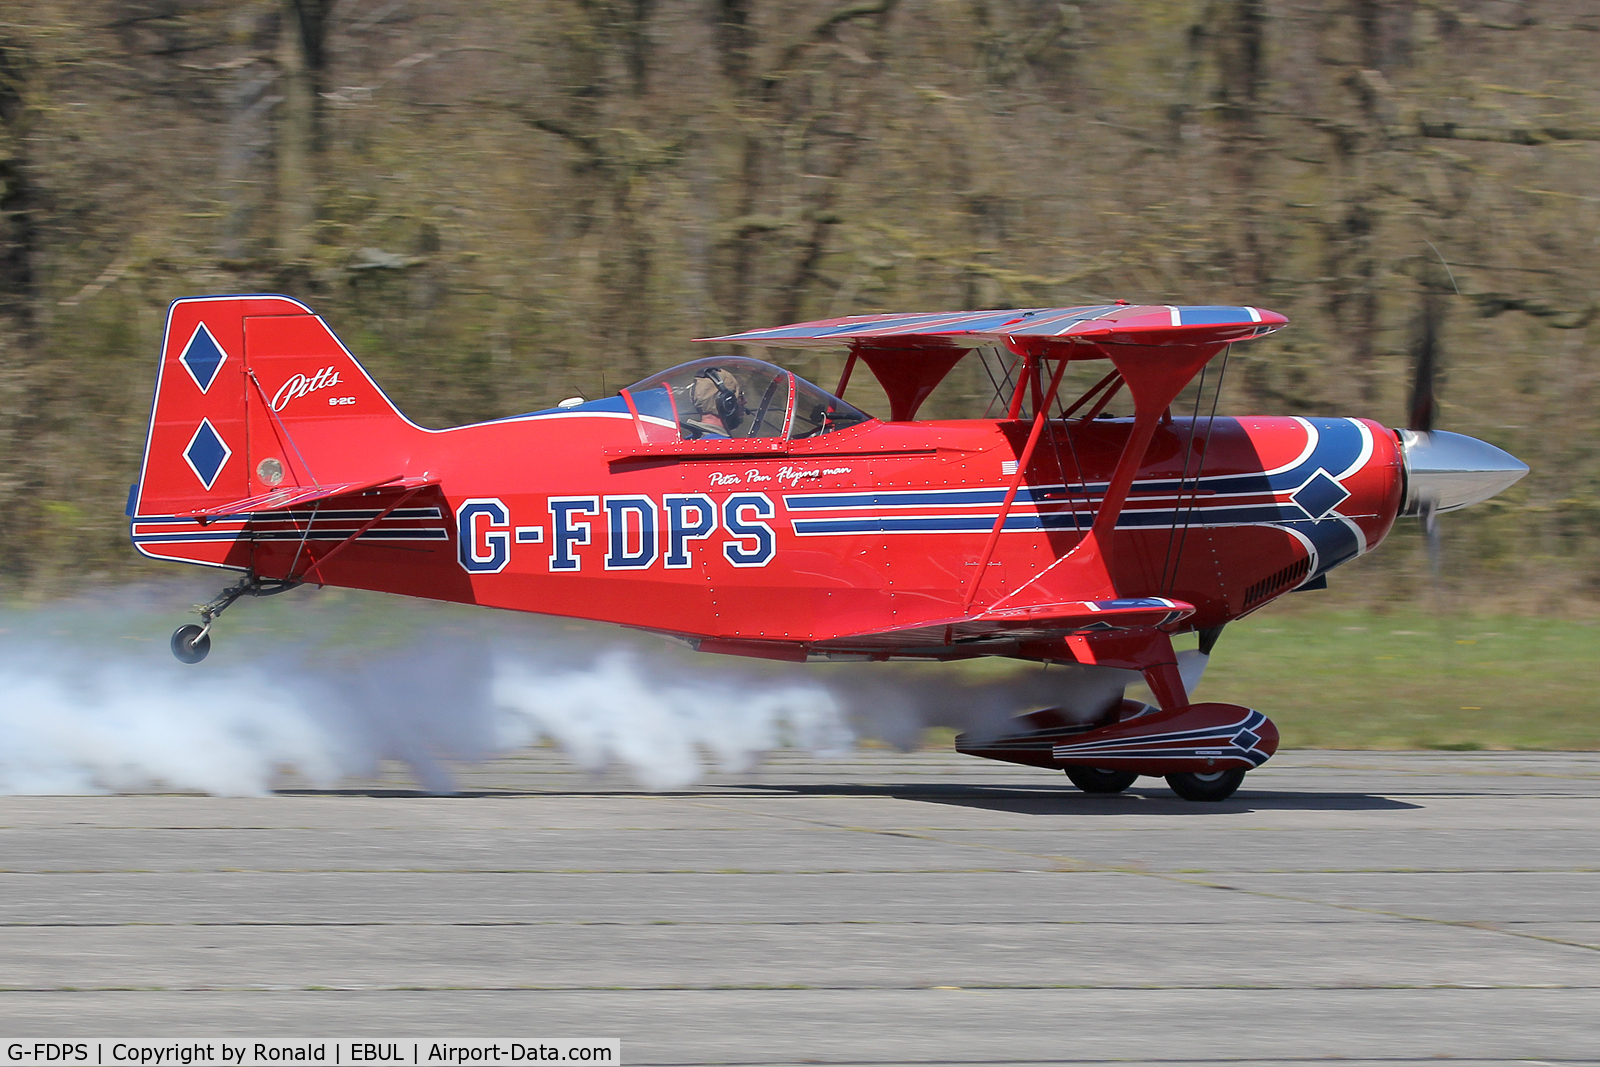 G-FDPS, 2004 Aviat Pitts S-2C Special C/N 6066, at ebul